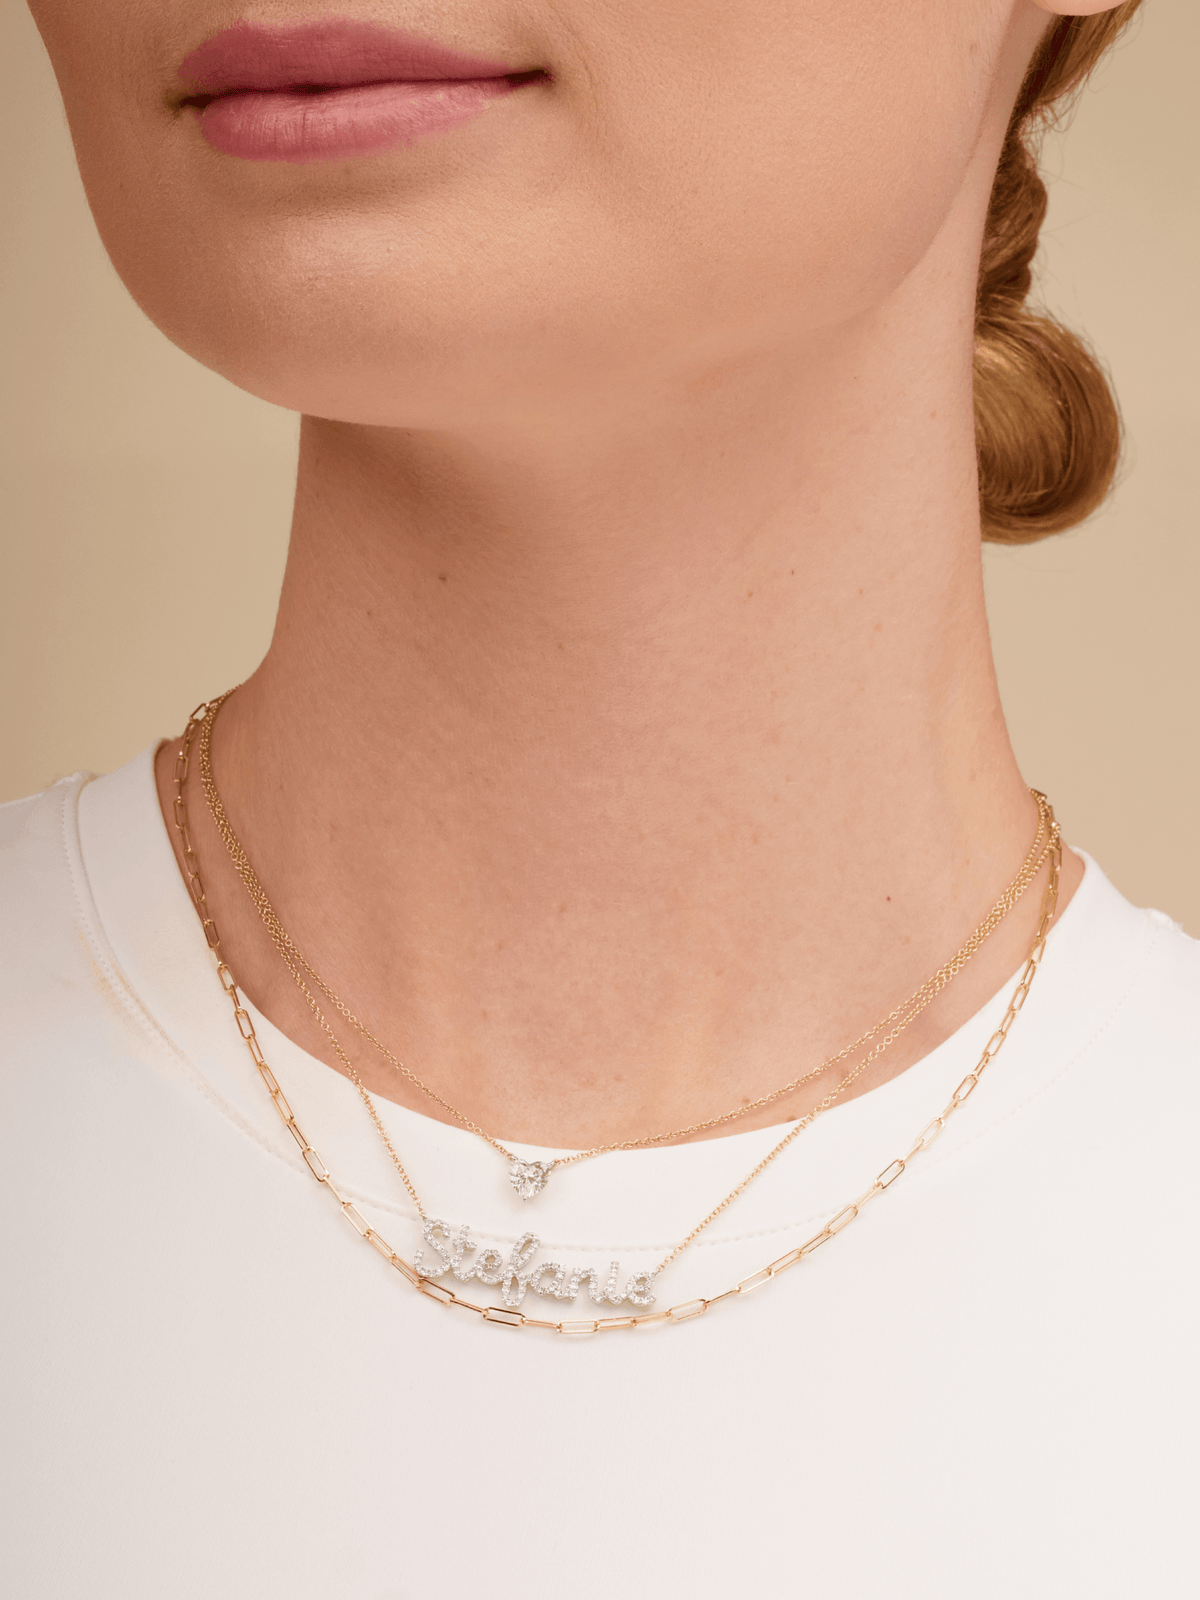 14K gold diamond name charm on dainty gold chain layered with gold paperclip necklace and dainty gold chain with diamond heart